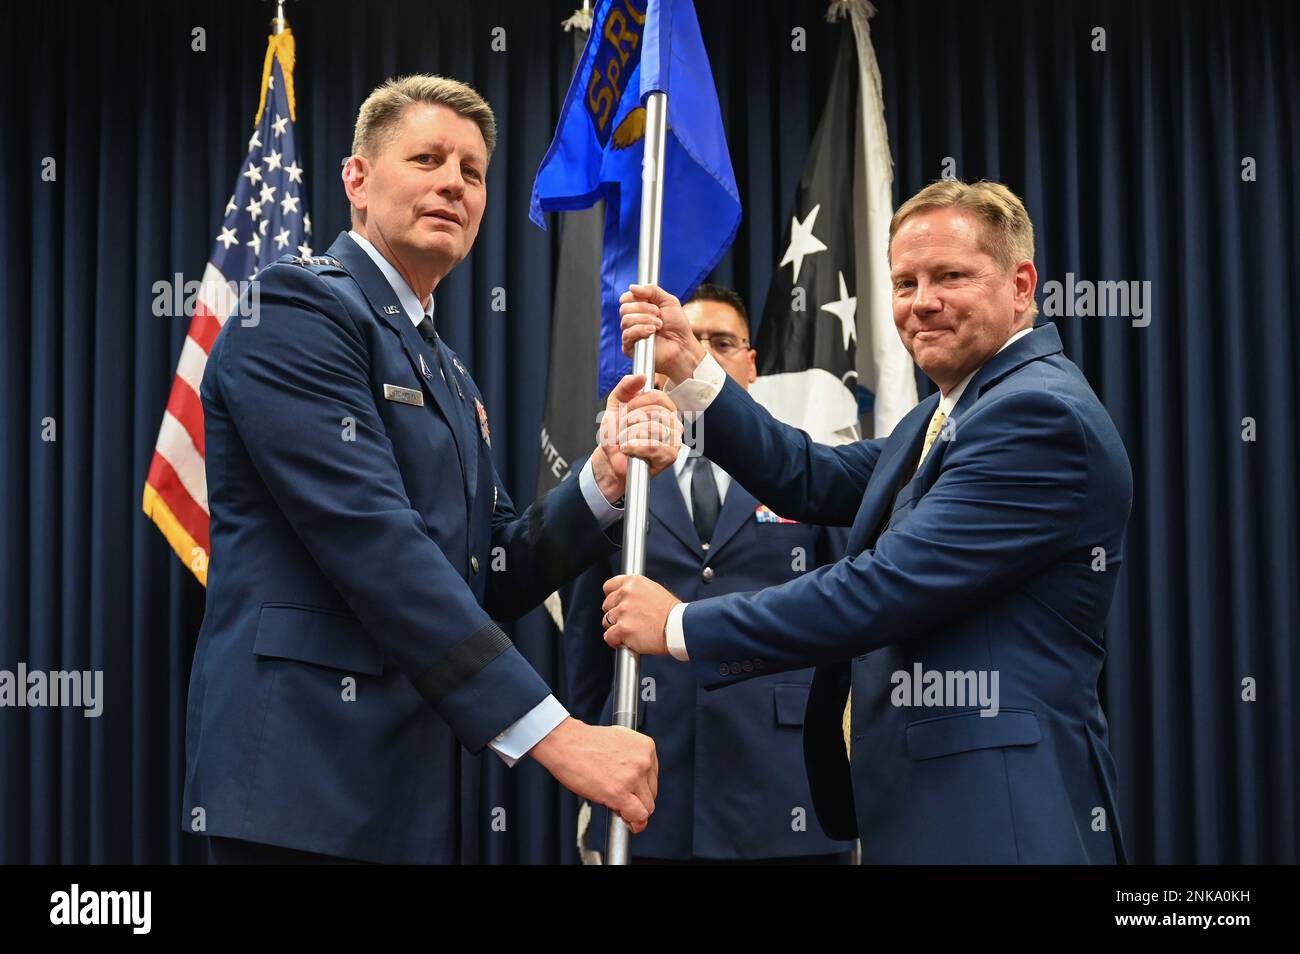 U.S. Space Force Gen. David D. Thompson, Vice Chief of Space Operations (left), presents the guidon to Dr. Kelly Hammett (right), Space Rapid Capabilities Office director and program executive officer, during an assumption of leadership ceremony at Kirtland Air Force Base, N.M., Aug. 12, 2022. The Space RCO's primary mission is to develop and deliver critical space capabilities for the U.S. Space Force. Stock Photo